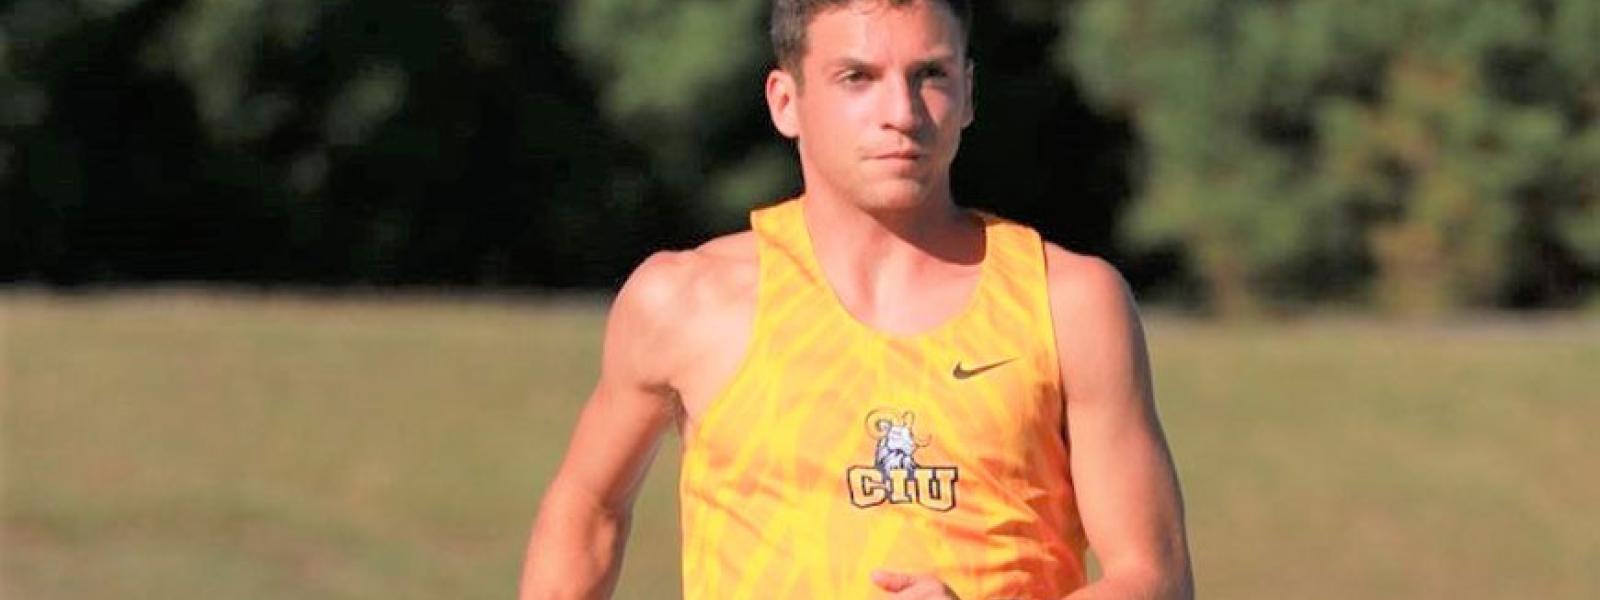 Blaise Shields was a track and field standout during his time at CIU. 